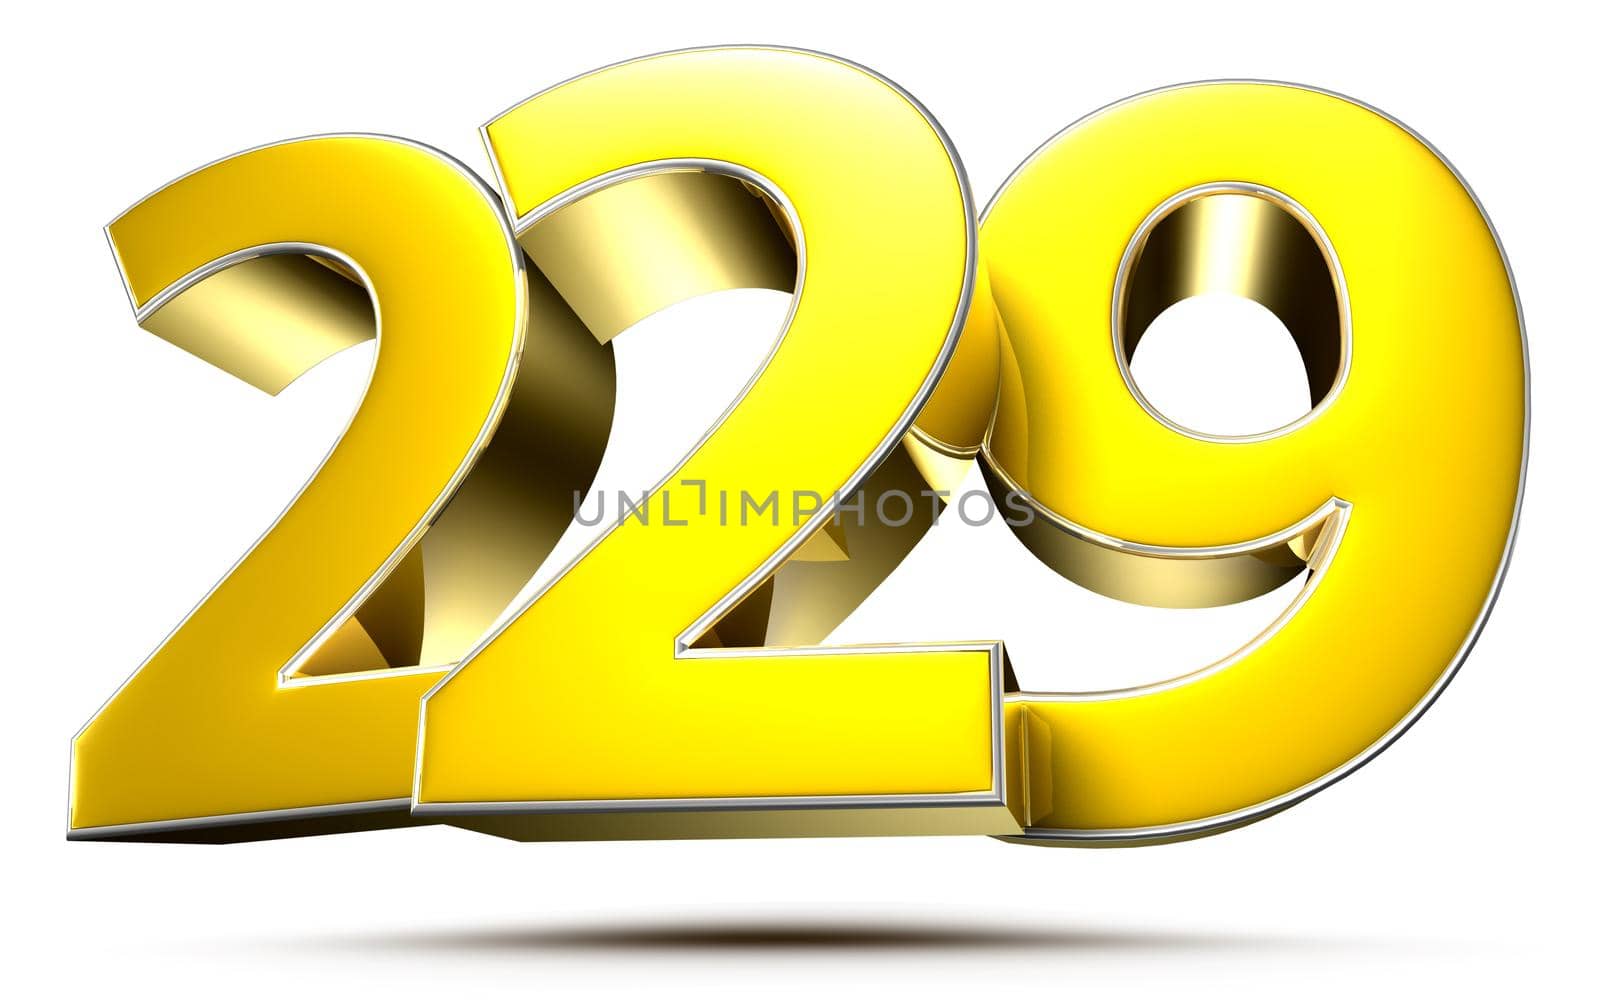 229 gold 3D illustration on white background with clipping path.